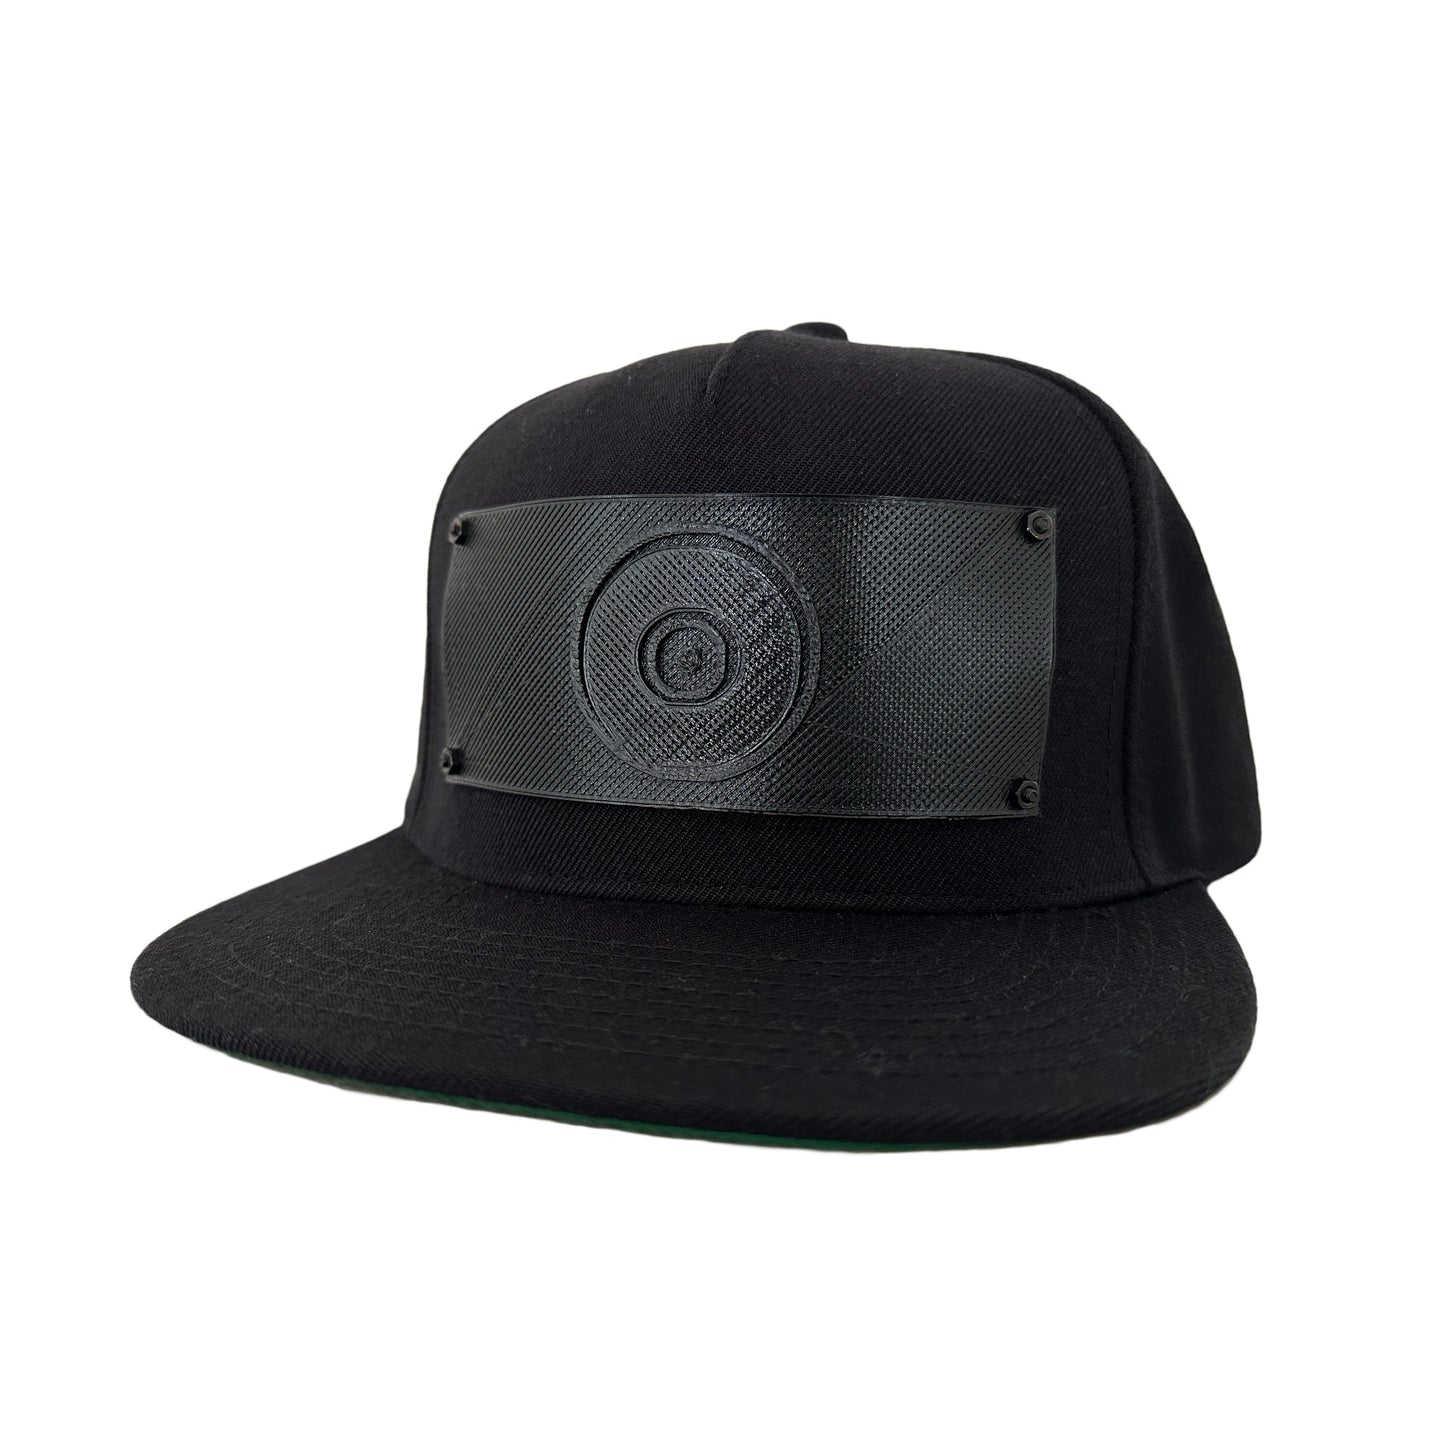 A black snapback baseball hat with a 3D printed black logo panel with an evil eye symbol on it.